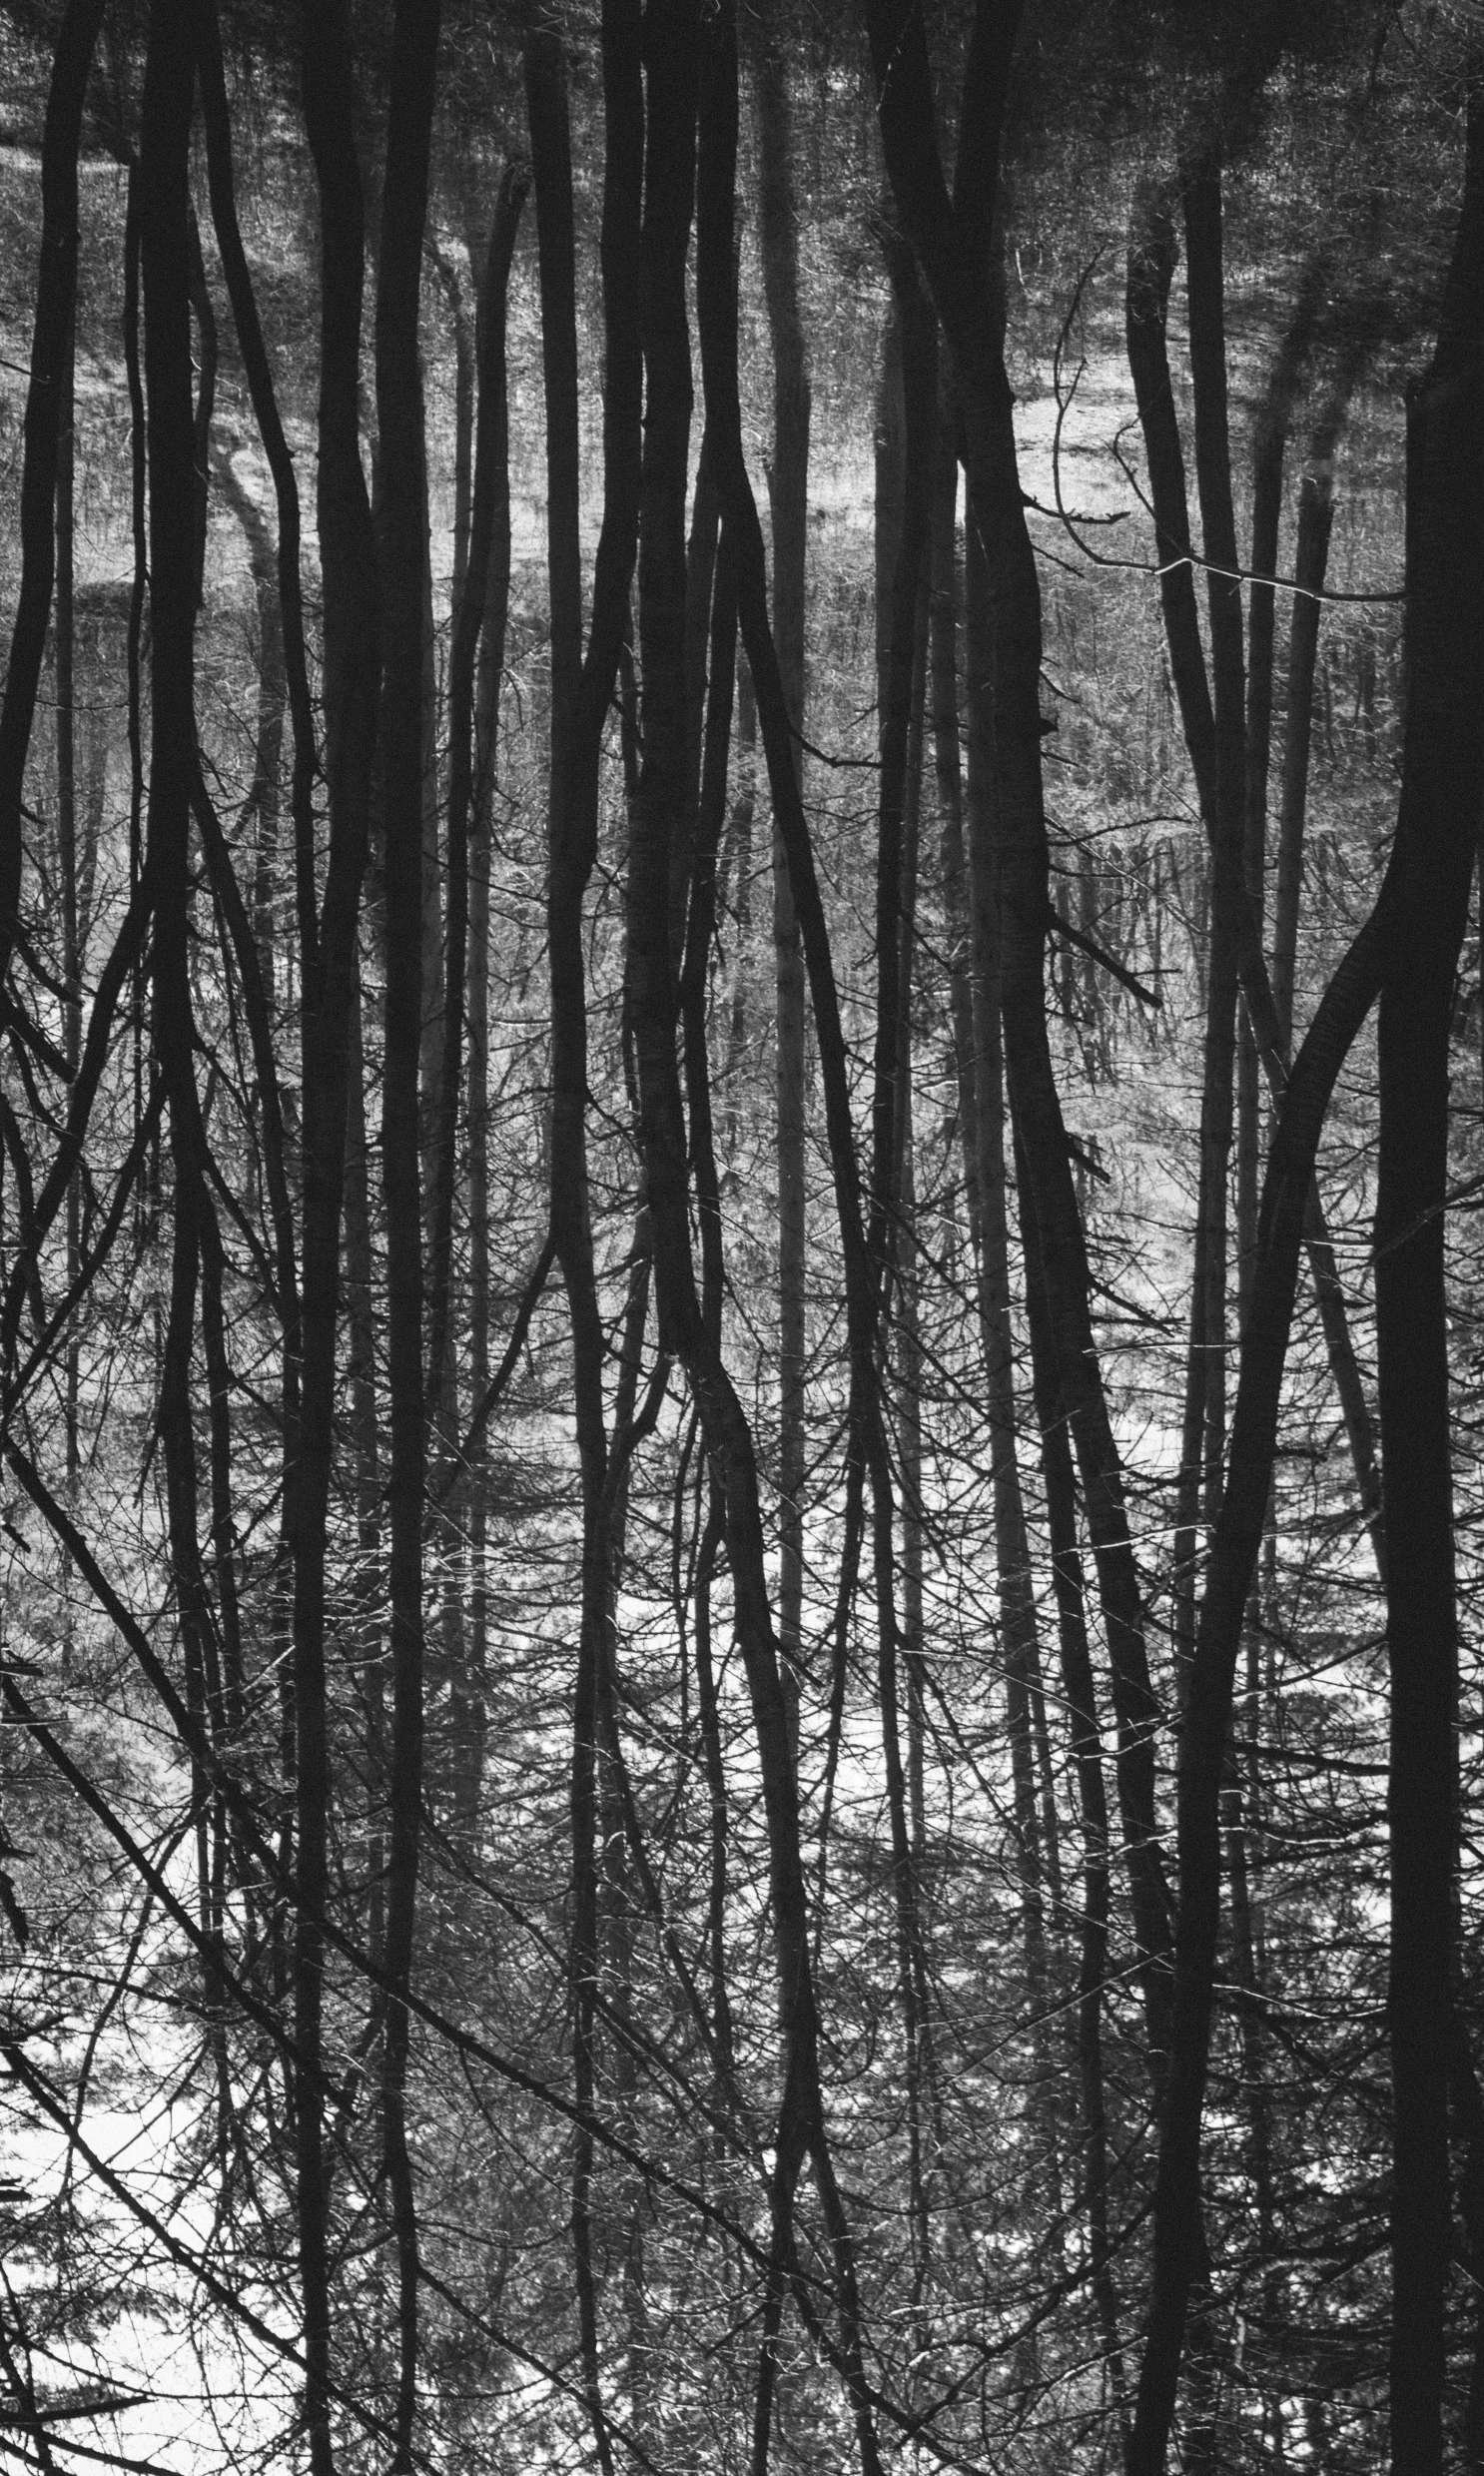 black and white trees in a forest are shown